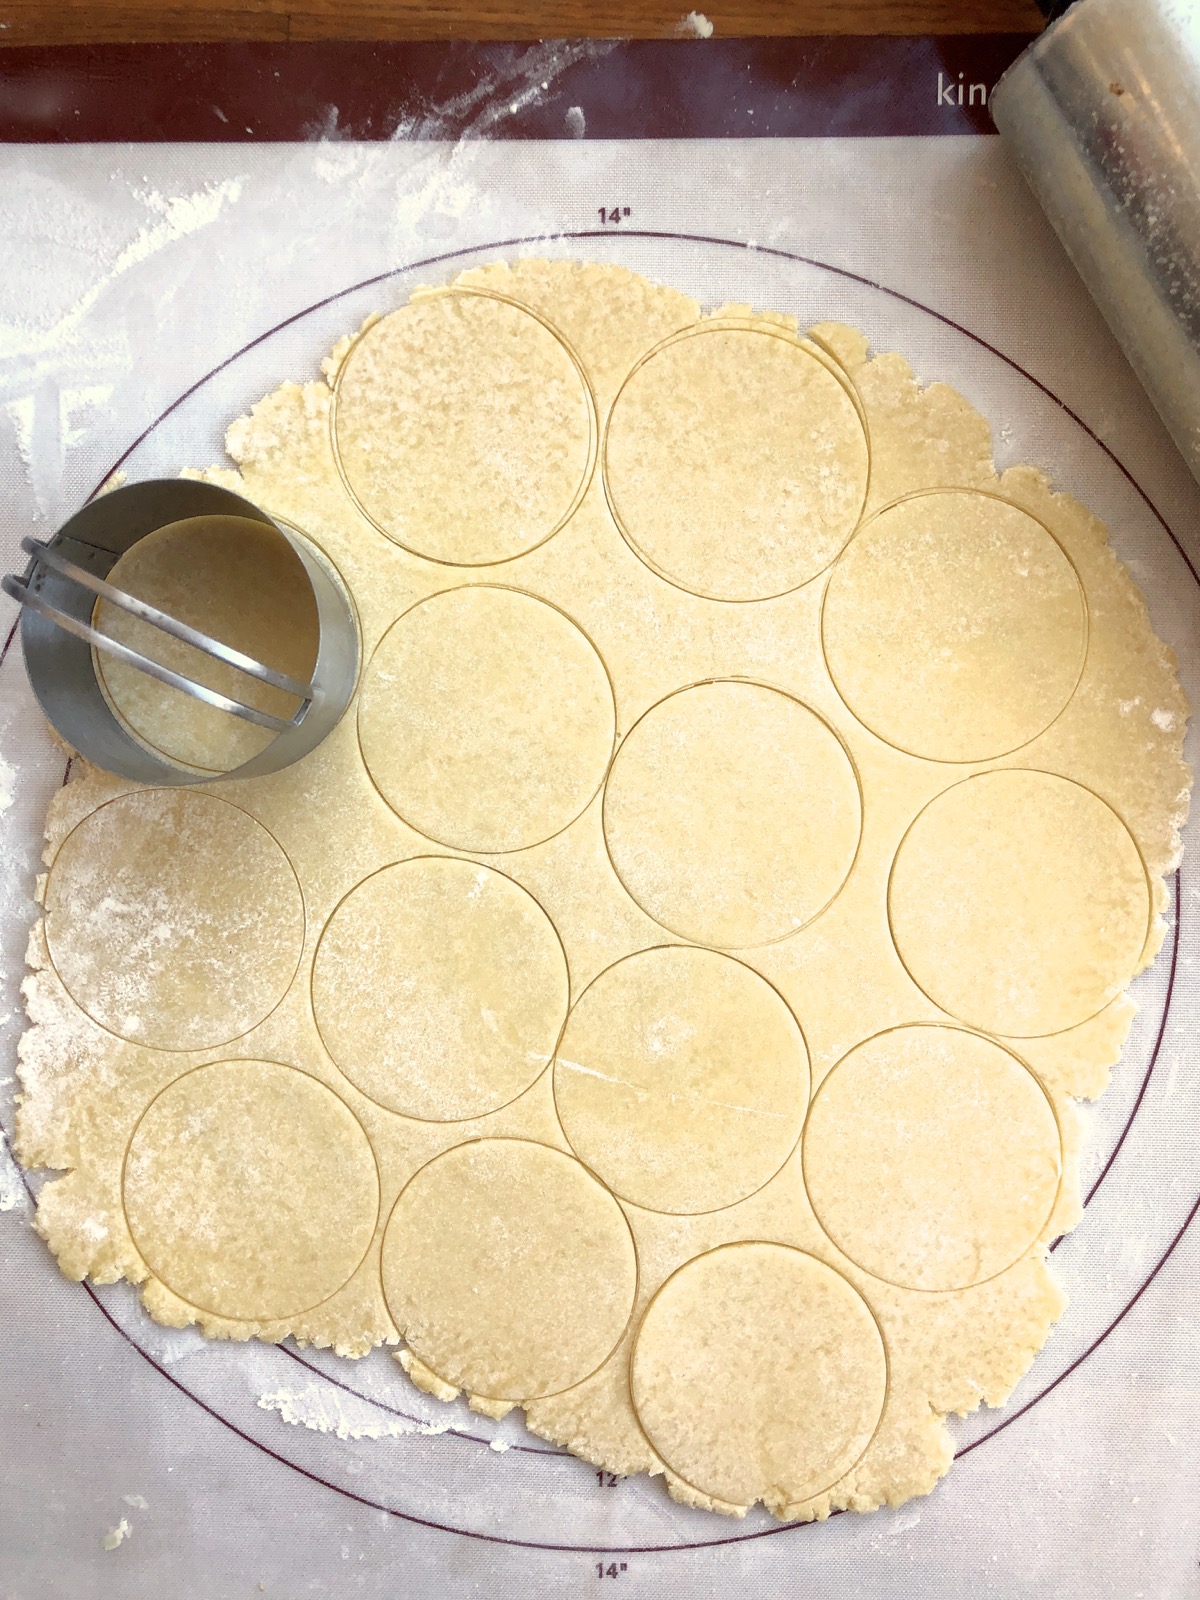 Rolled-out dough with a round biscuit cutter, marked with circles from the biscuit cutter to show where to cut.